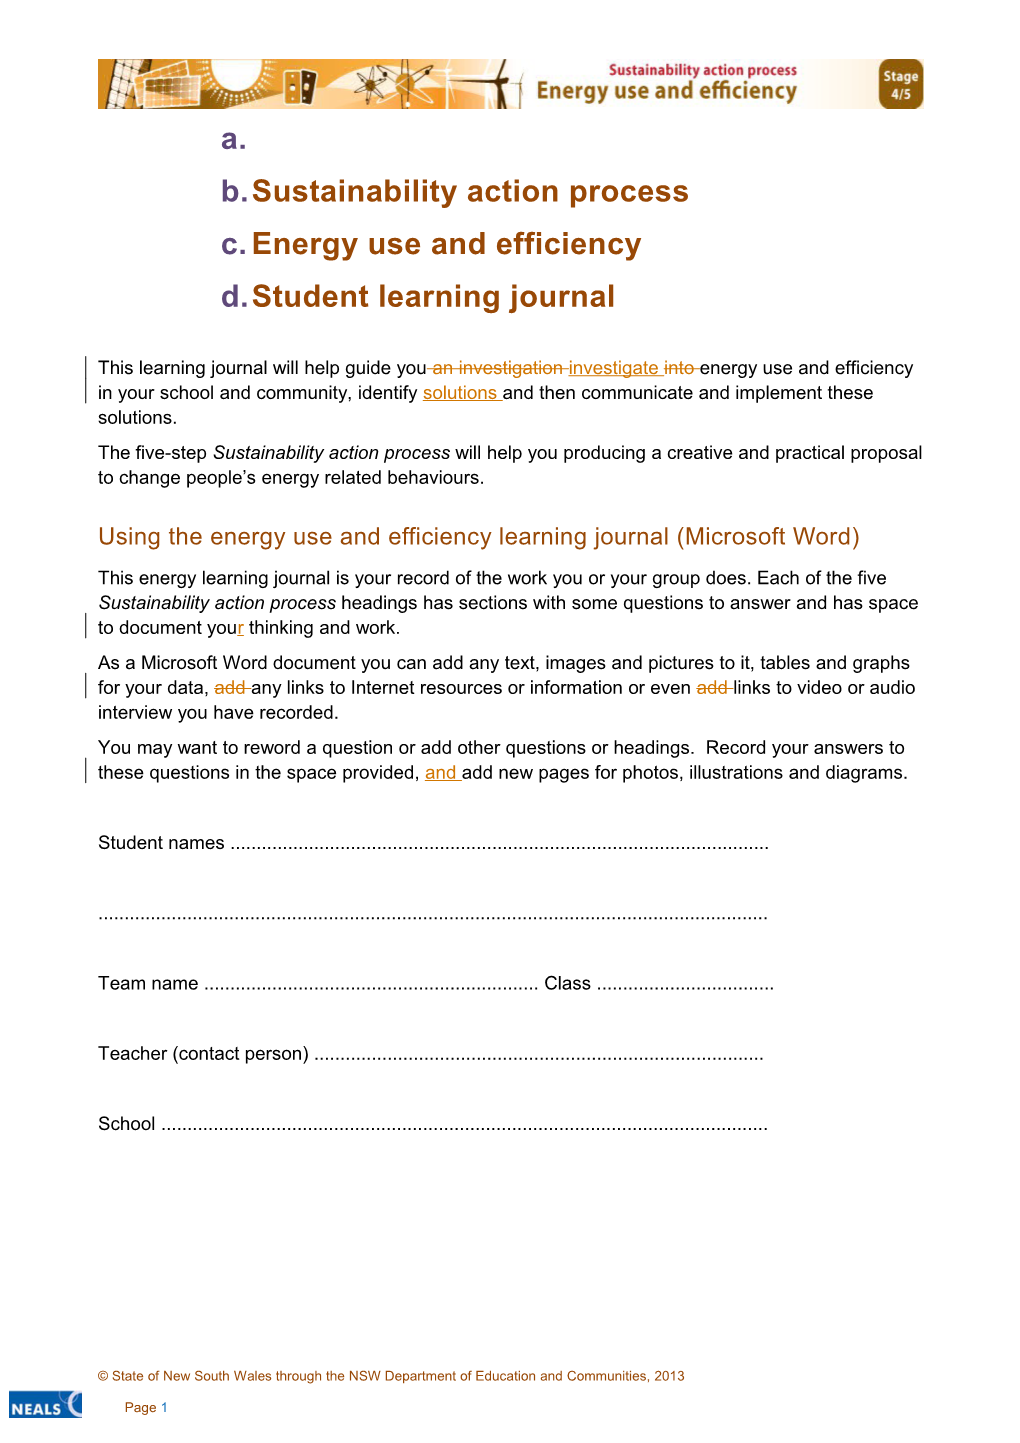 Sustainability Action Process: Energy Use and Efficiency. Learning Journal